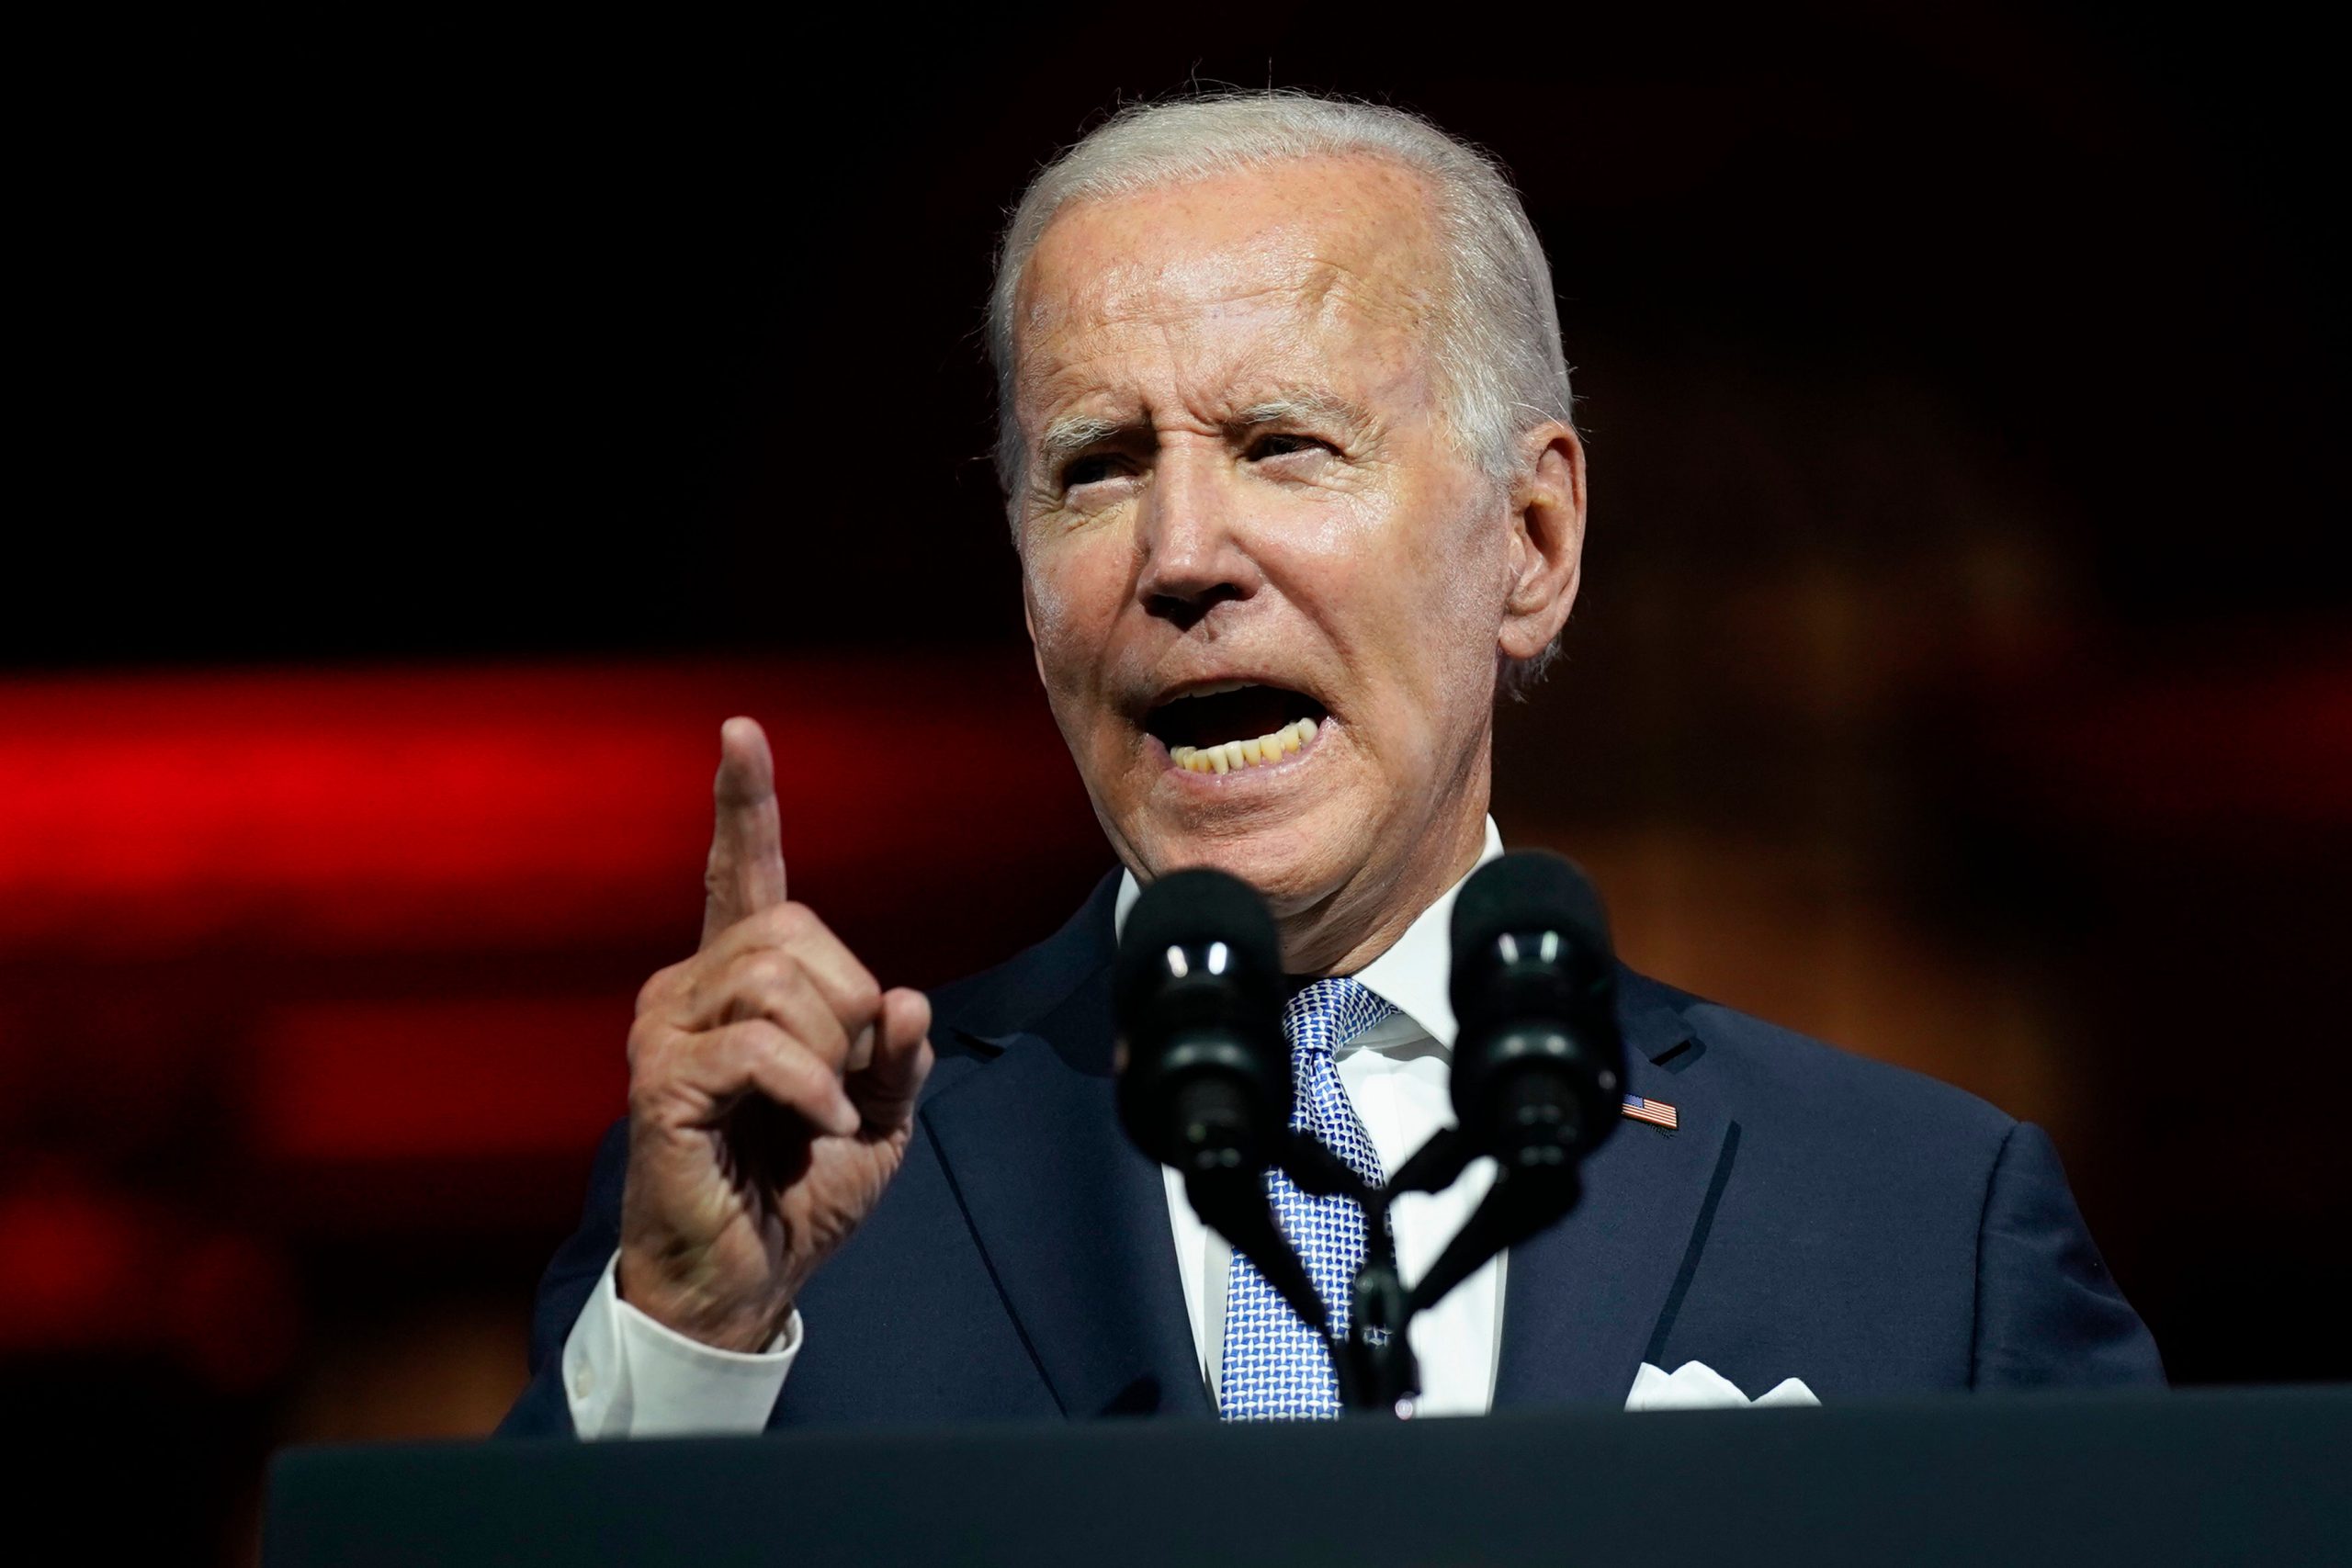 ‘Ban Biden’ trends in response to president calling for assault weapons ban